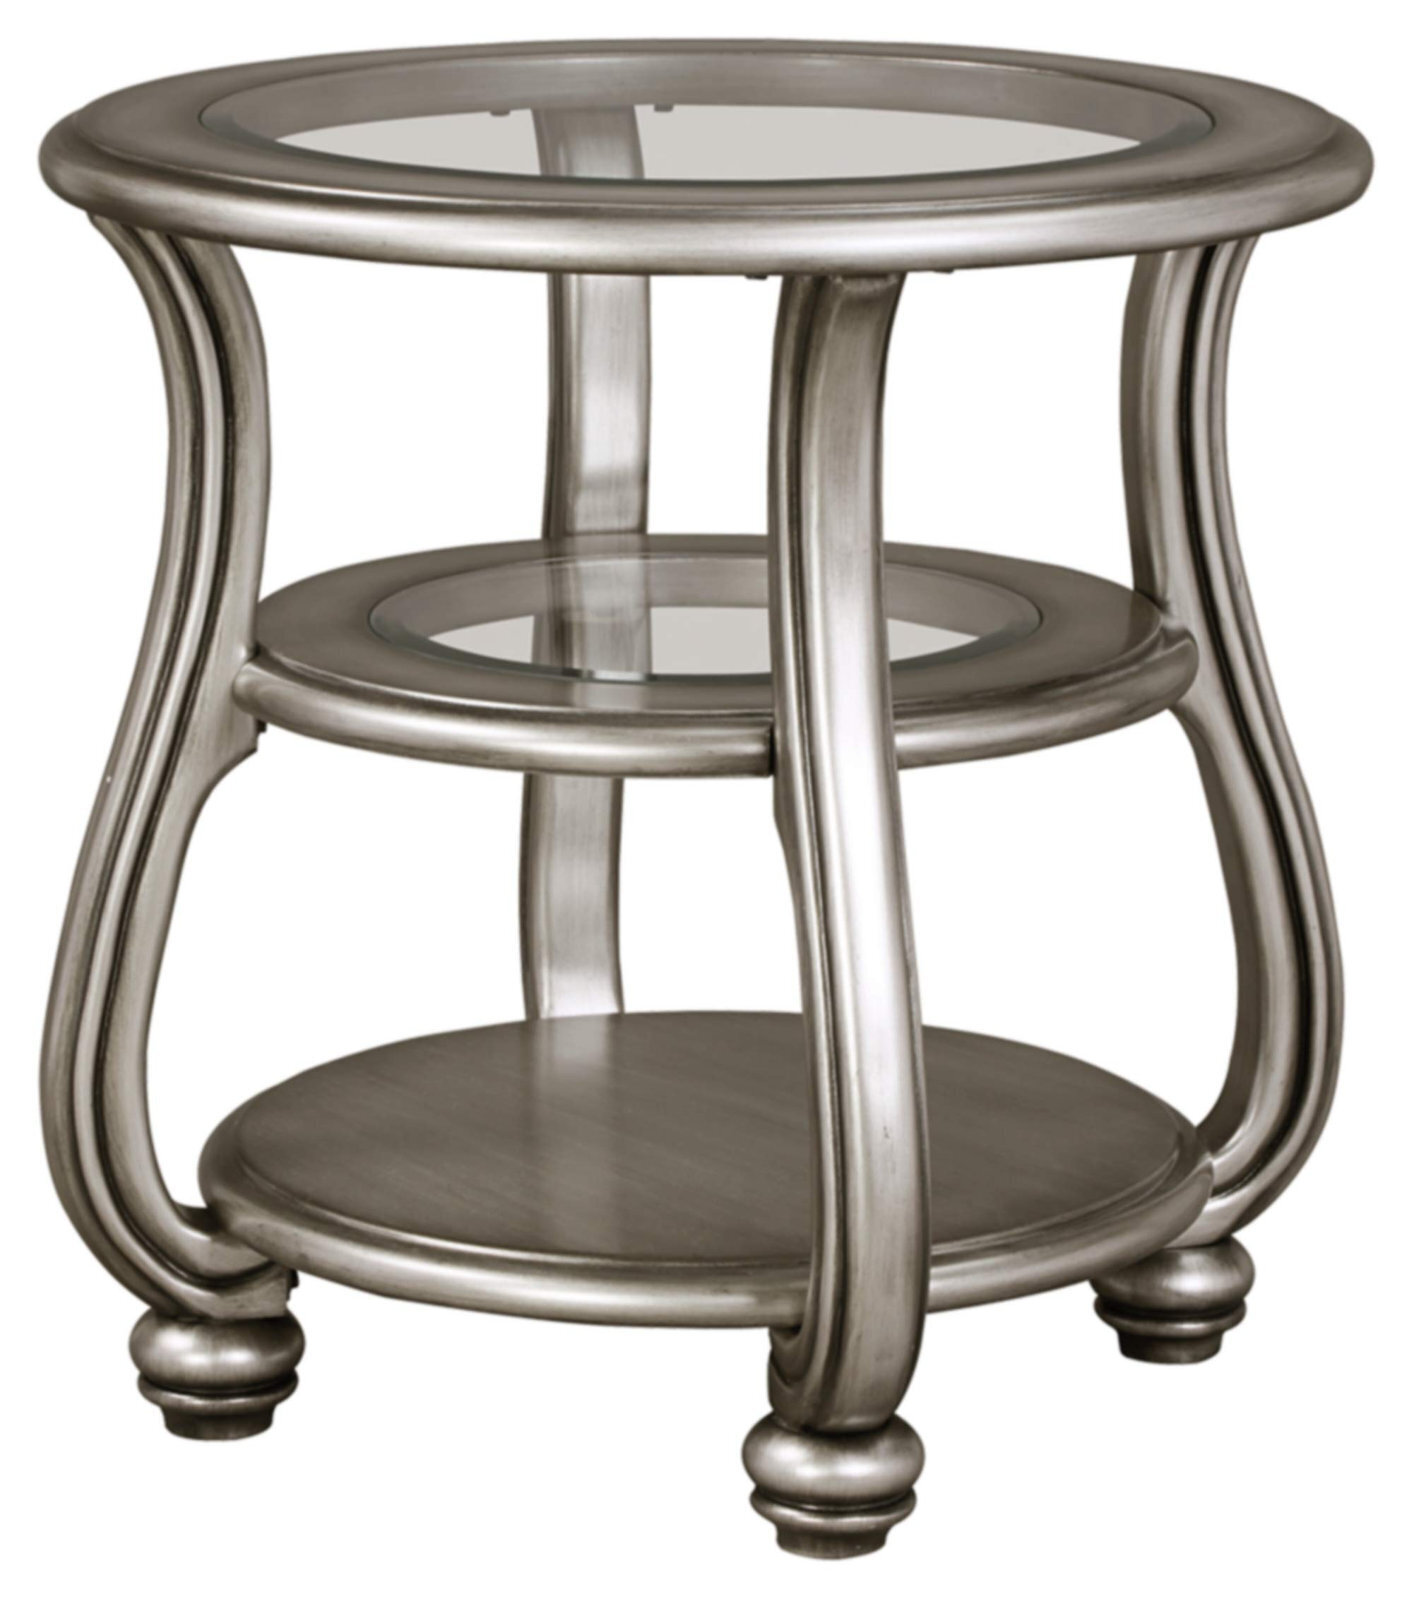 End Table With Metallic Silver Paint